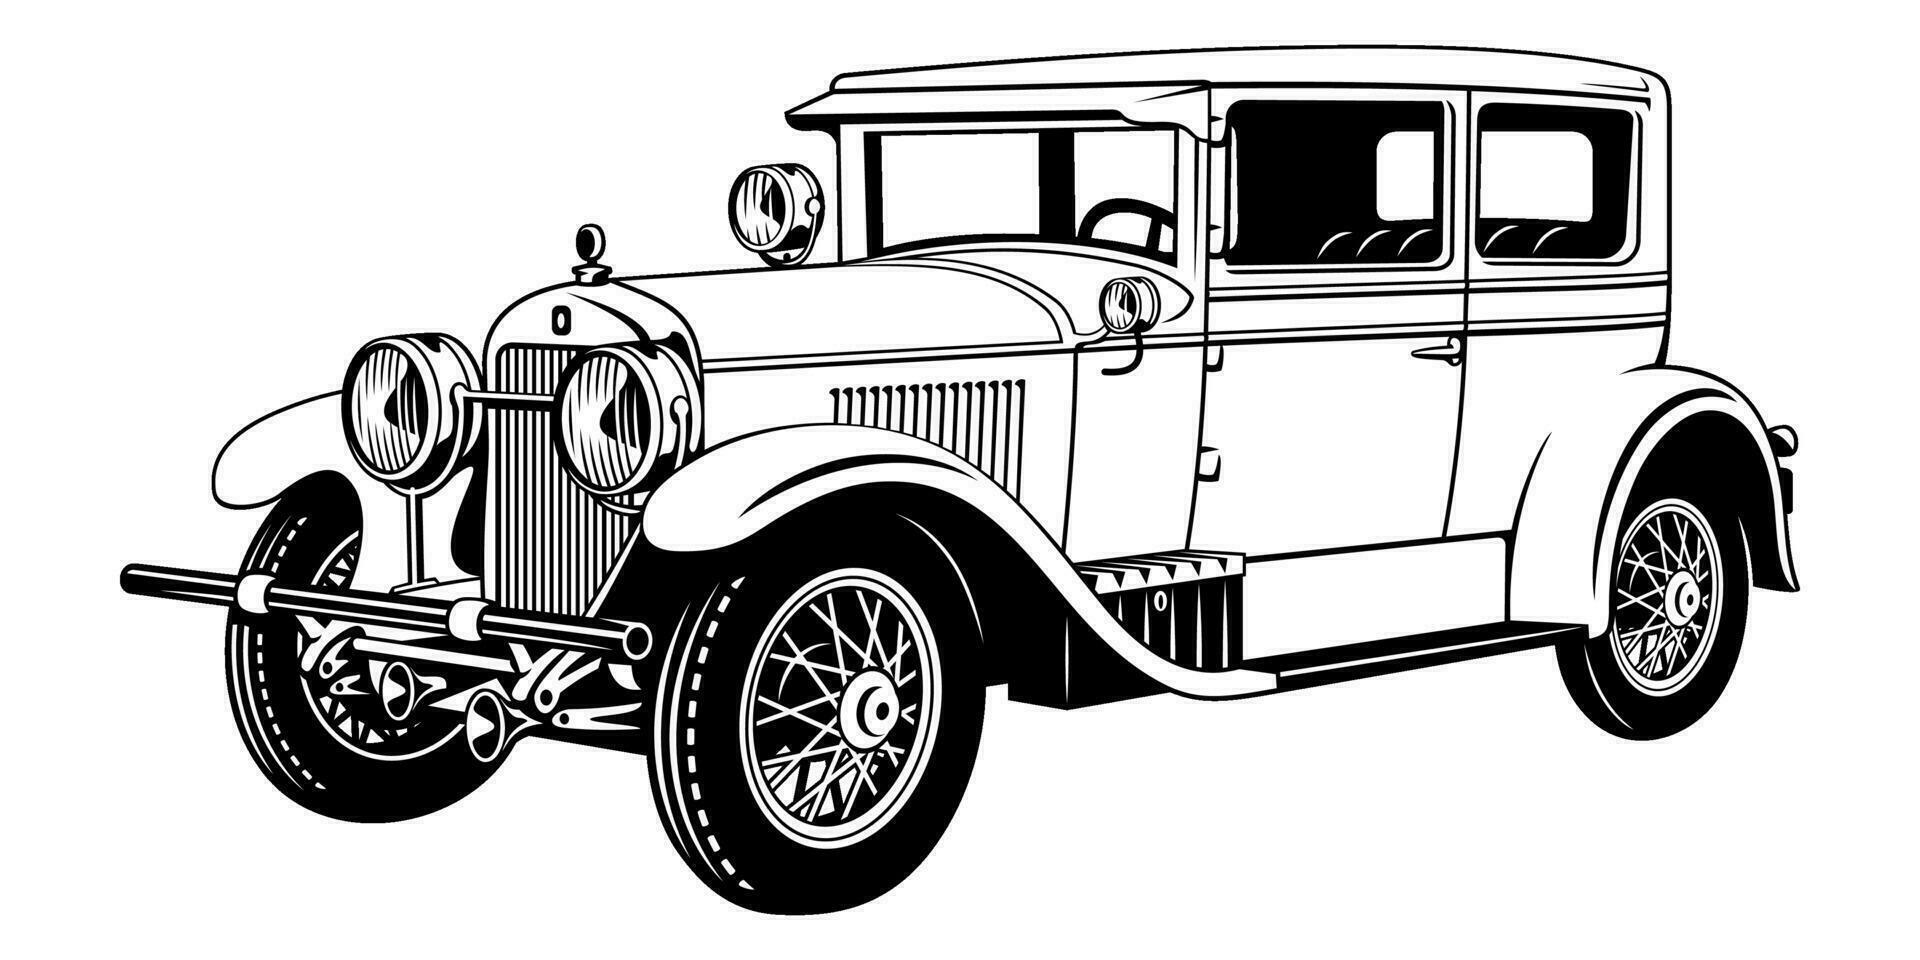 Classic Vintage Retro Car. Black and white vector clipart isolated on white.